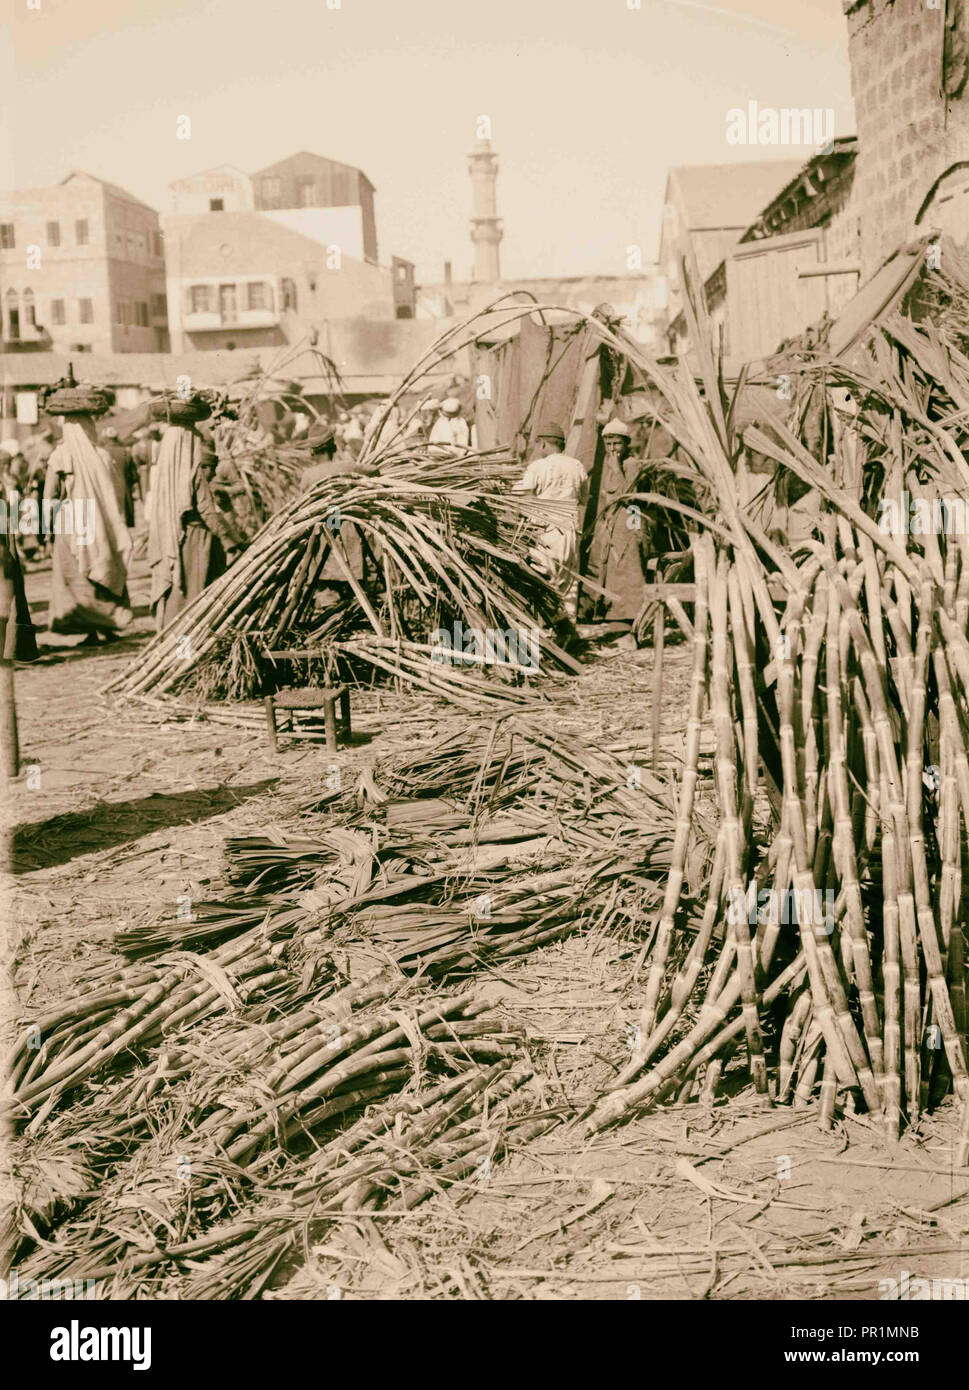 Economic plants. Sugarcane (Saccharum officinarum L.), police standing near sign on beach, Jaffa?, Israel 1900, Middle East Stock Photo